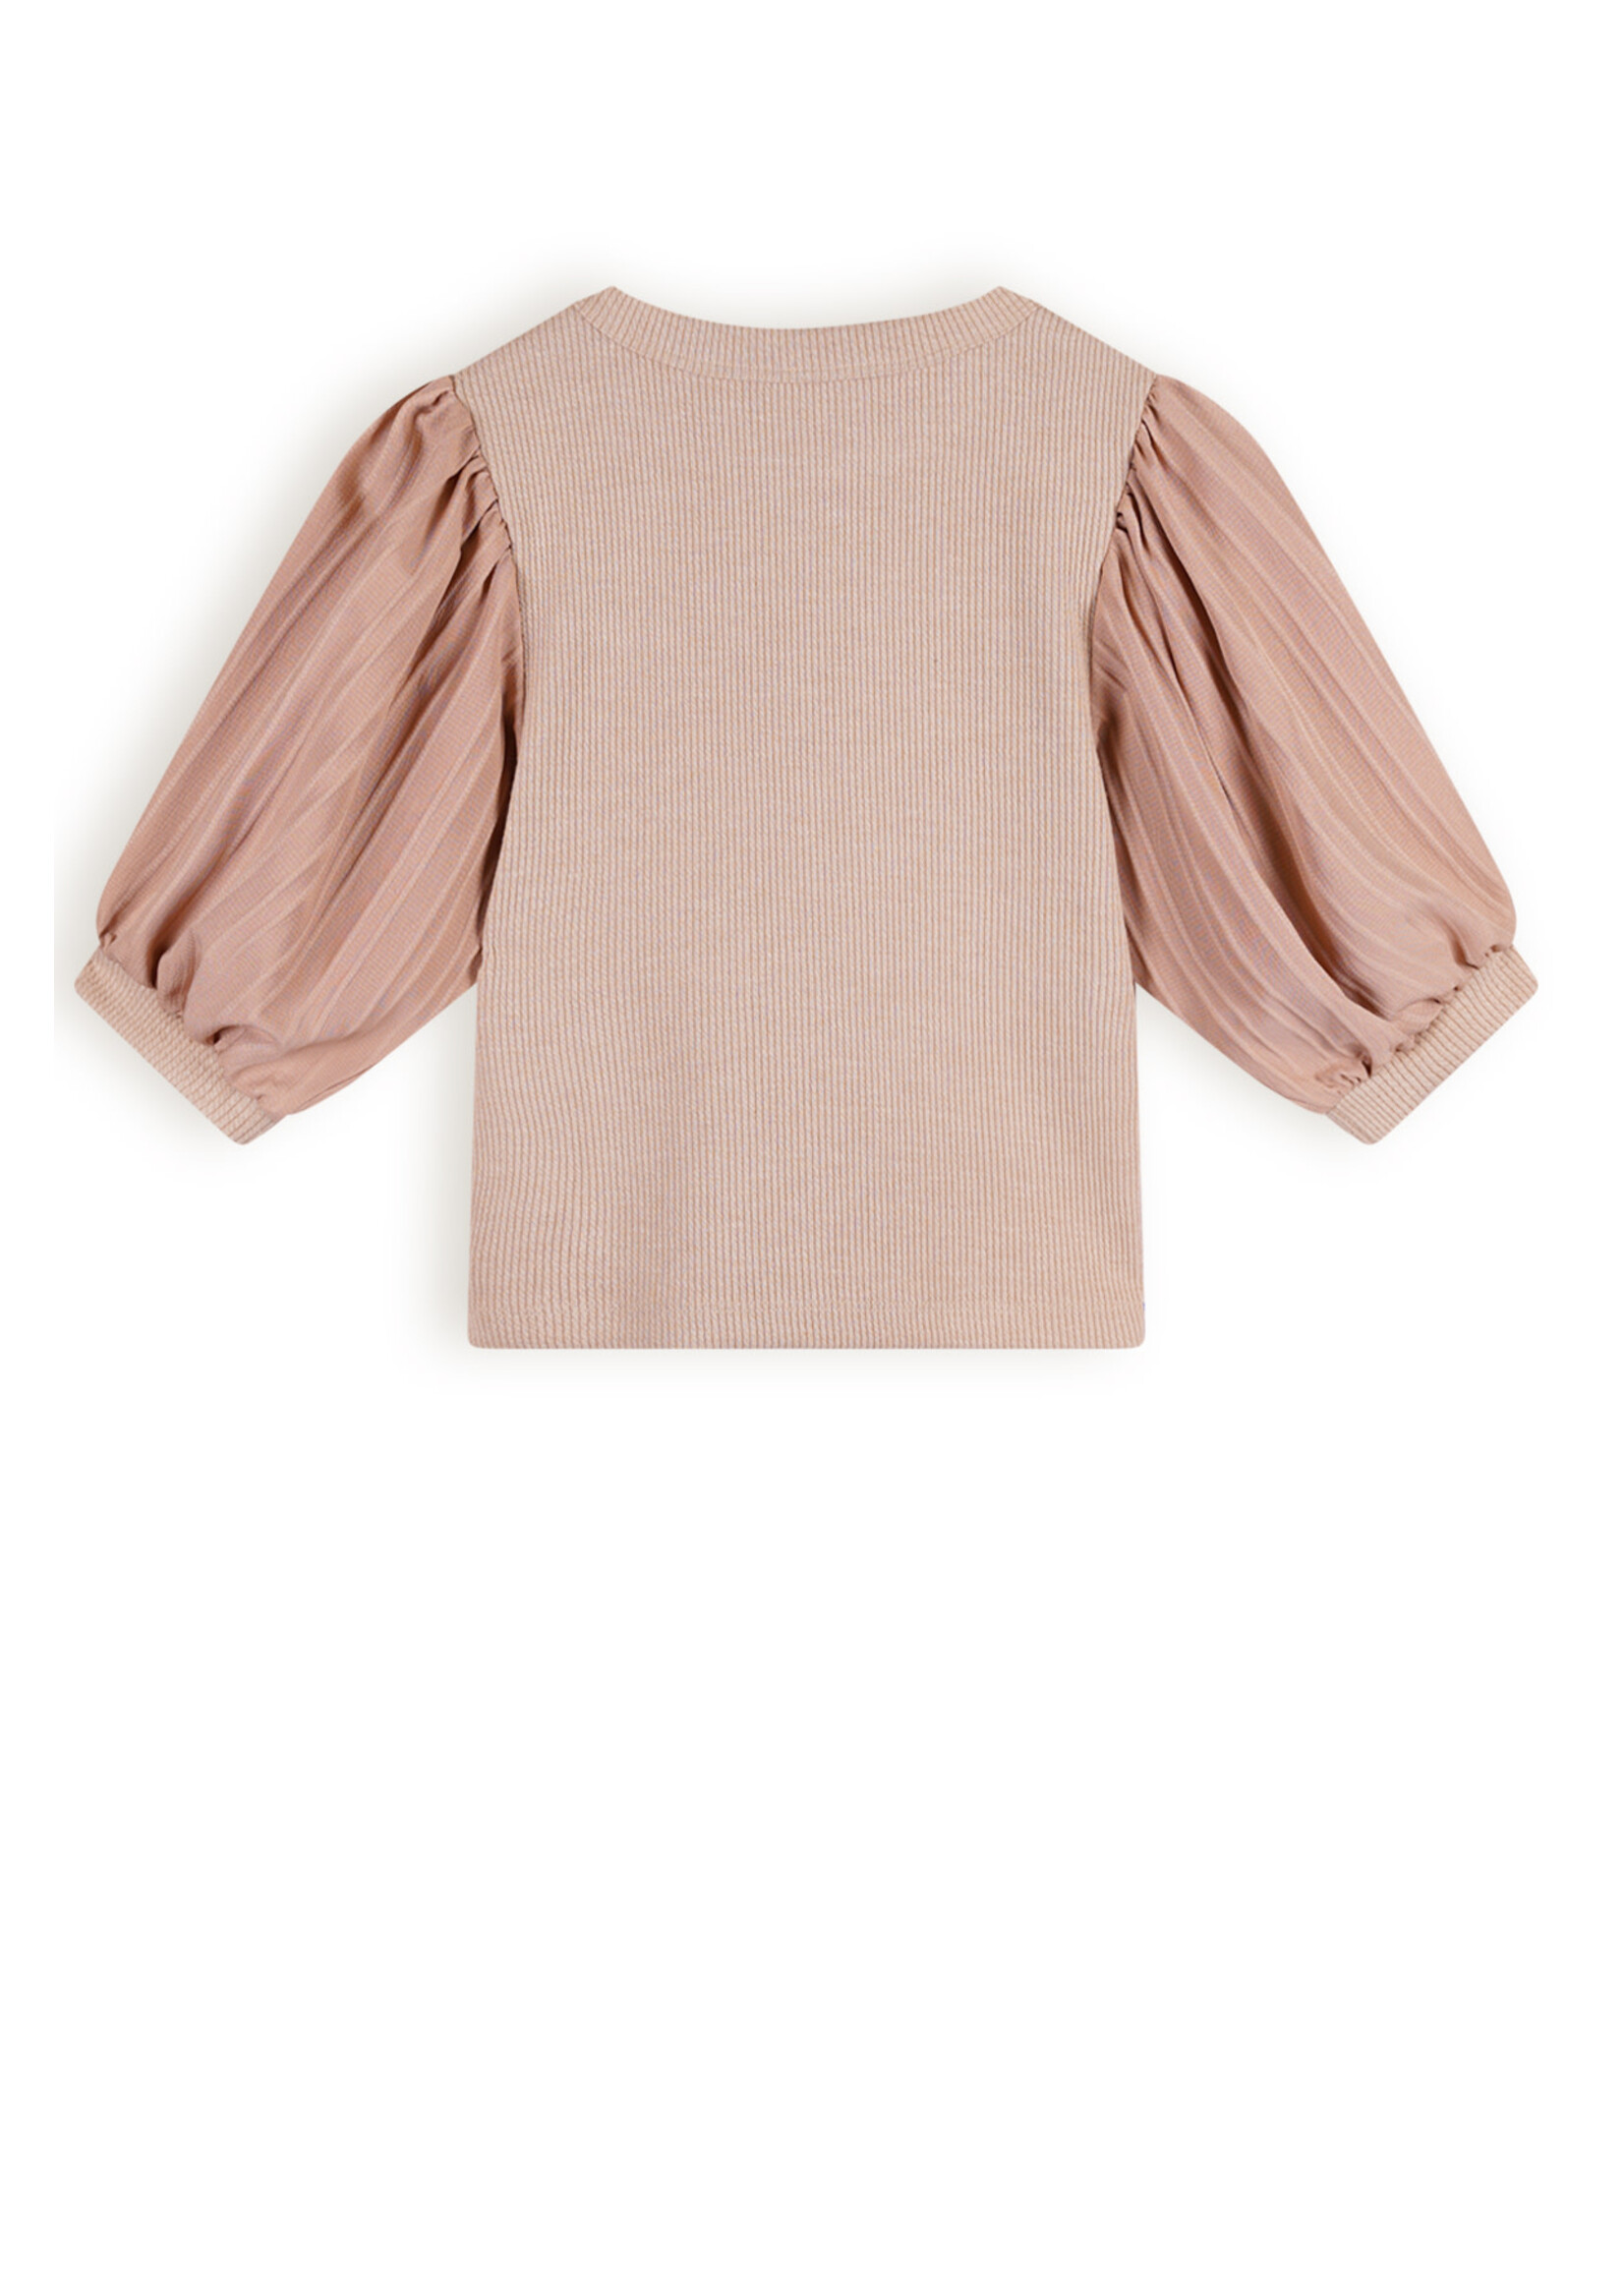 Nobell Nobell Kylia Melange Rib Top with puffed Sleeves Q402-3403 Rosy Sand